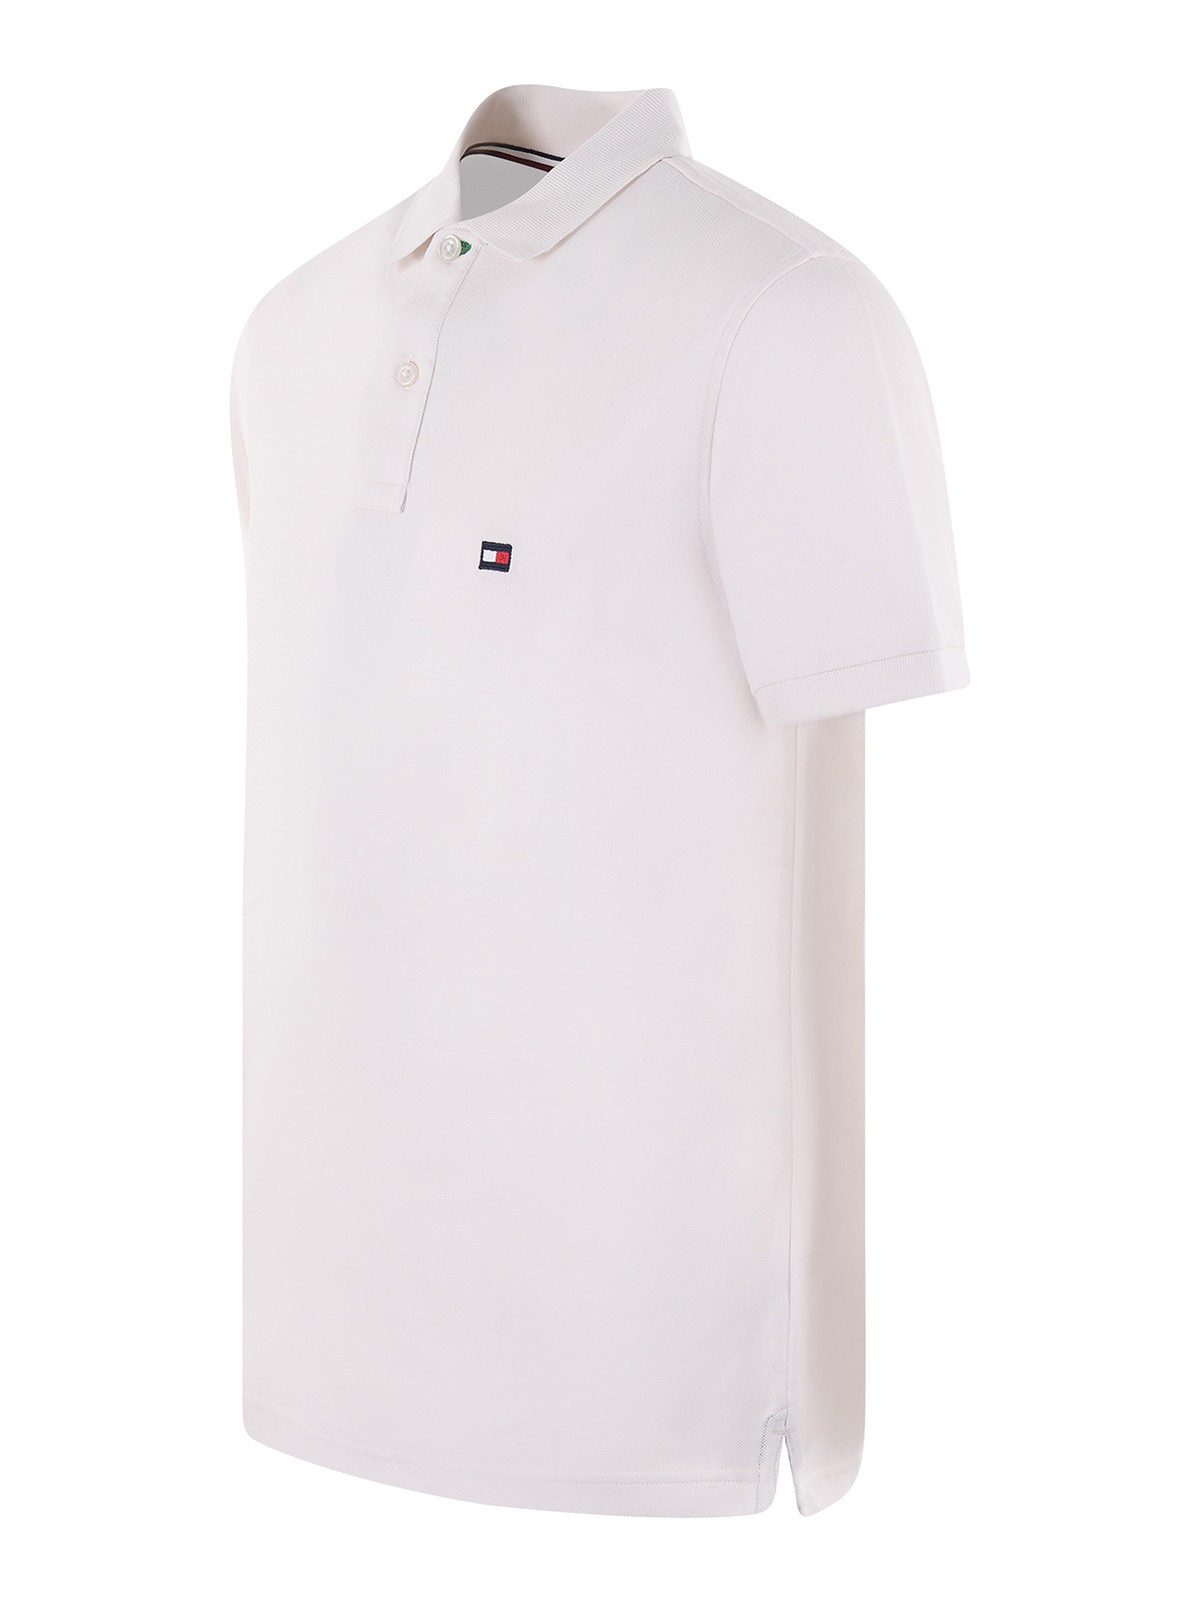 Let at ske rotation under Polo shirts Tommy Hilfiger - Tommy hilfiger polo shirt - 31342AC0